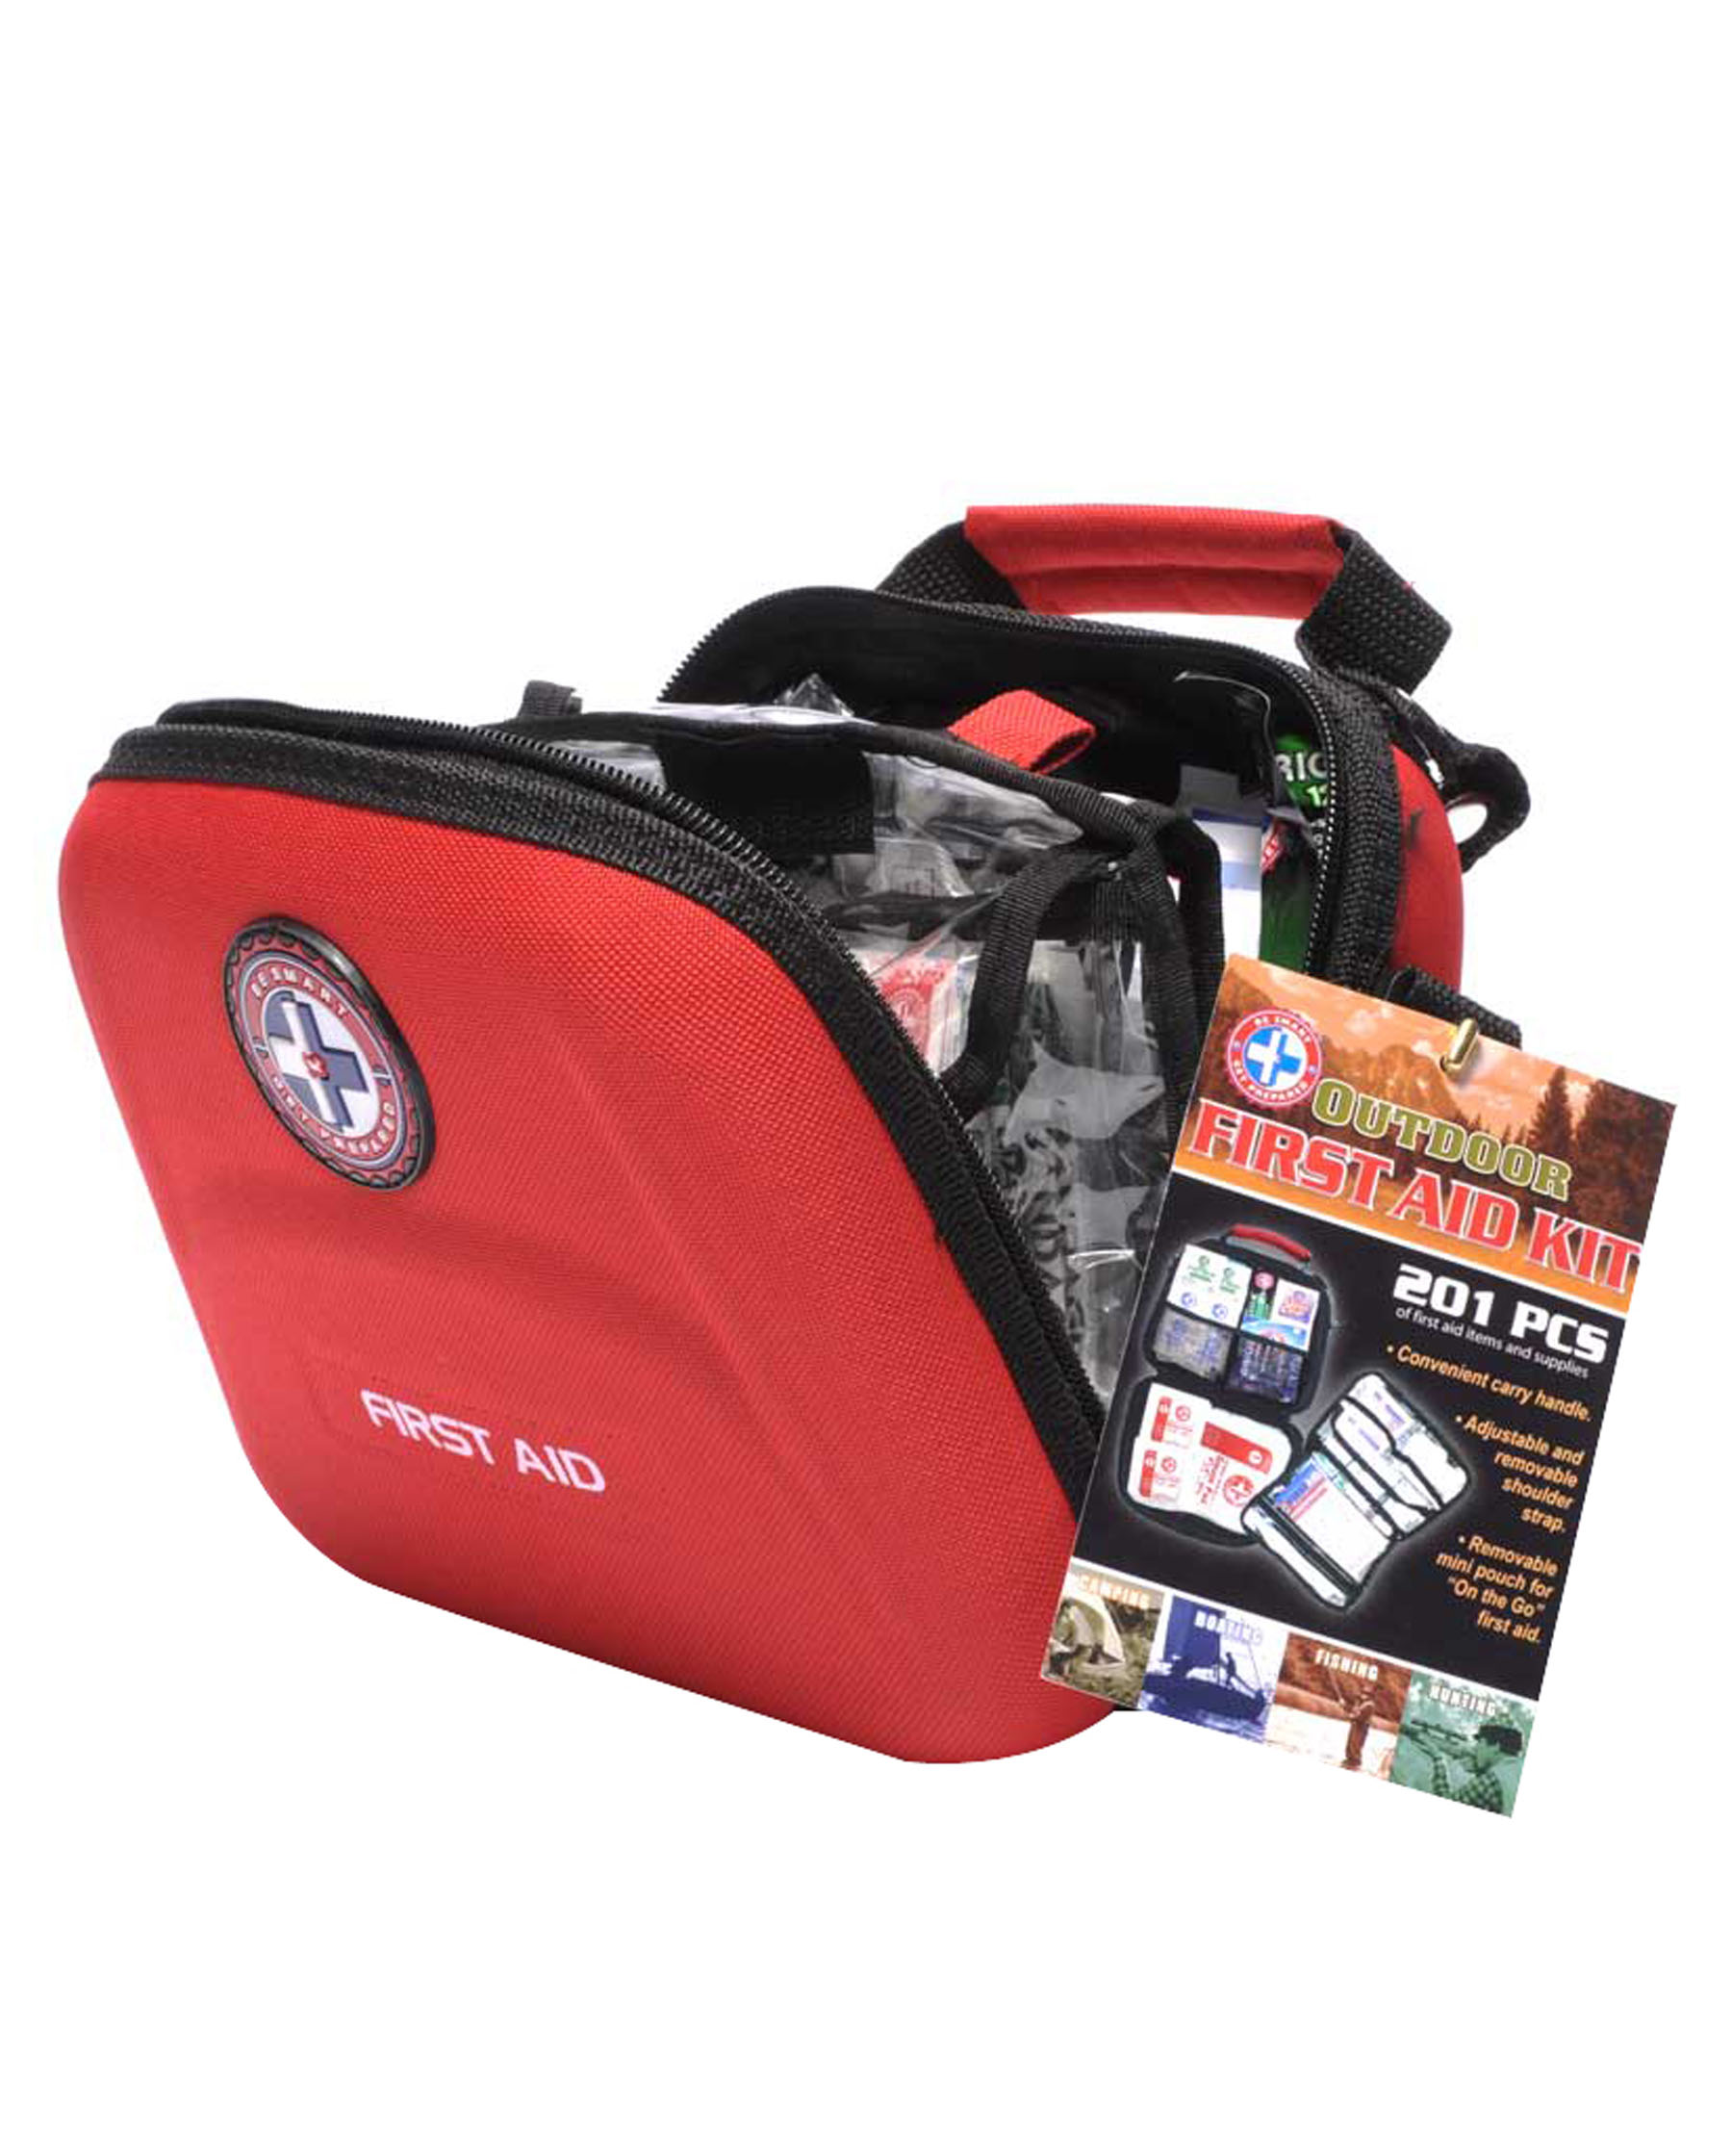 Outdoor First Aid Kit 201 PC - Medsurge Healthcare Limited